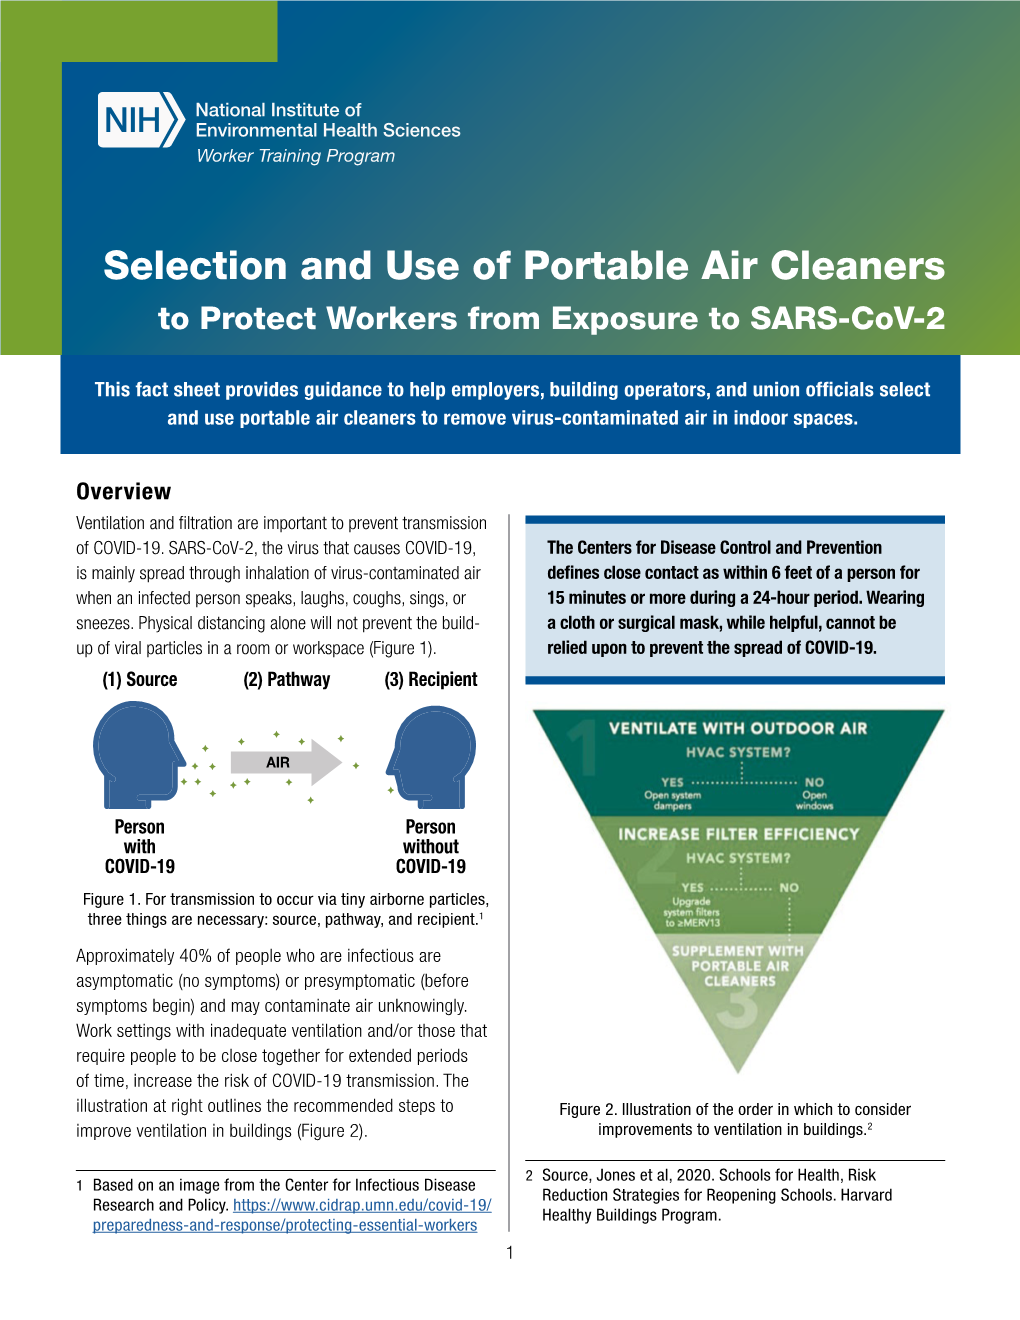 Selection and Use of Portable Air Cleaners to Protect Workers from Exposure to SARS-Cov-2